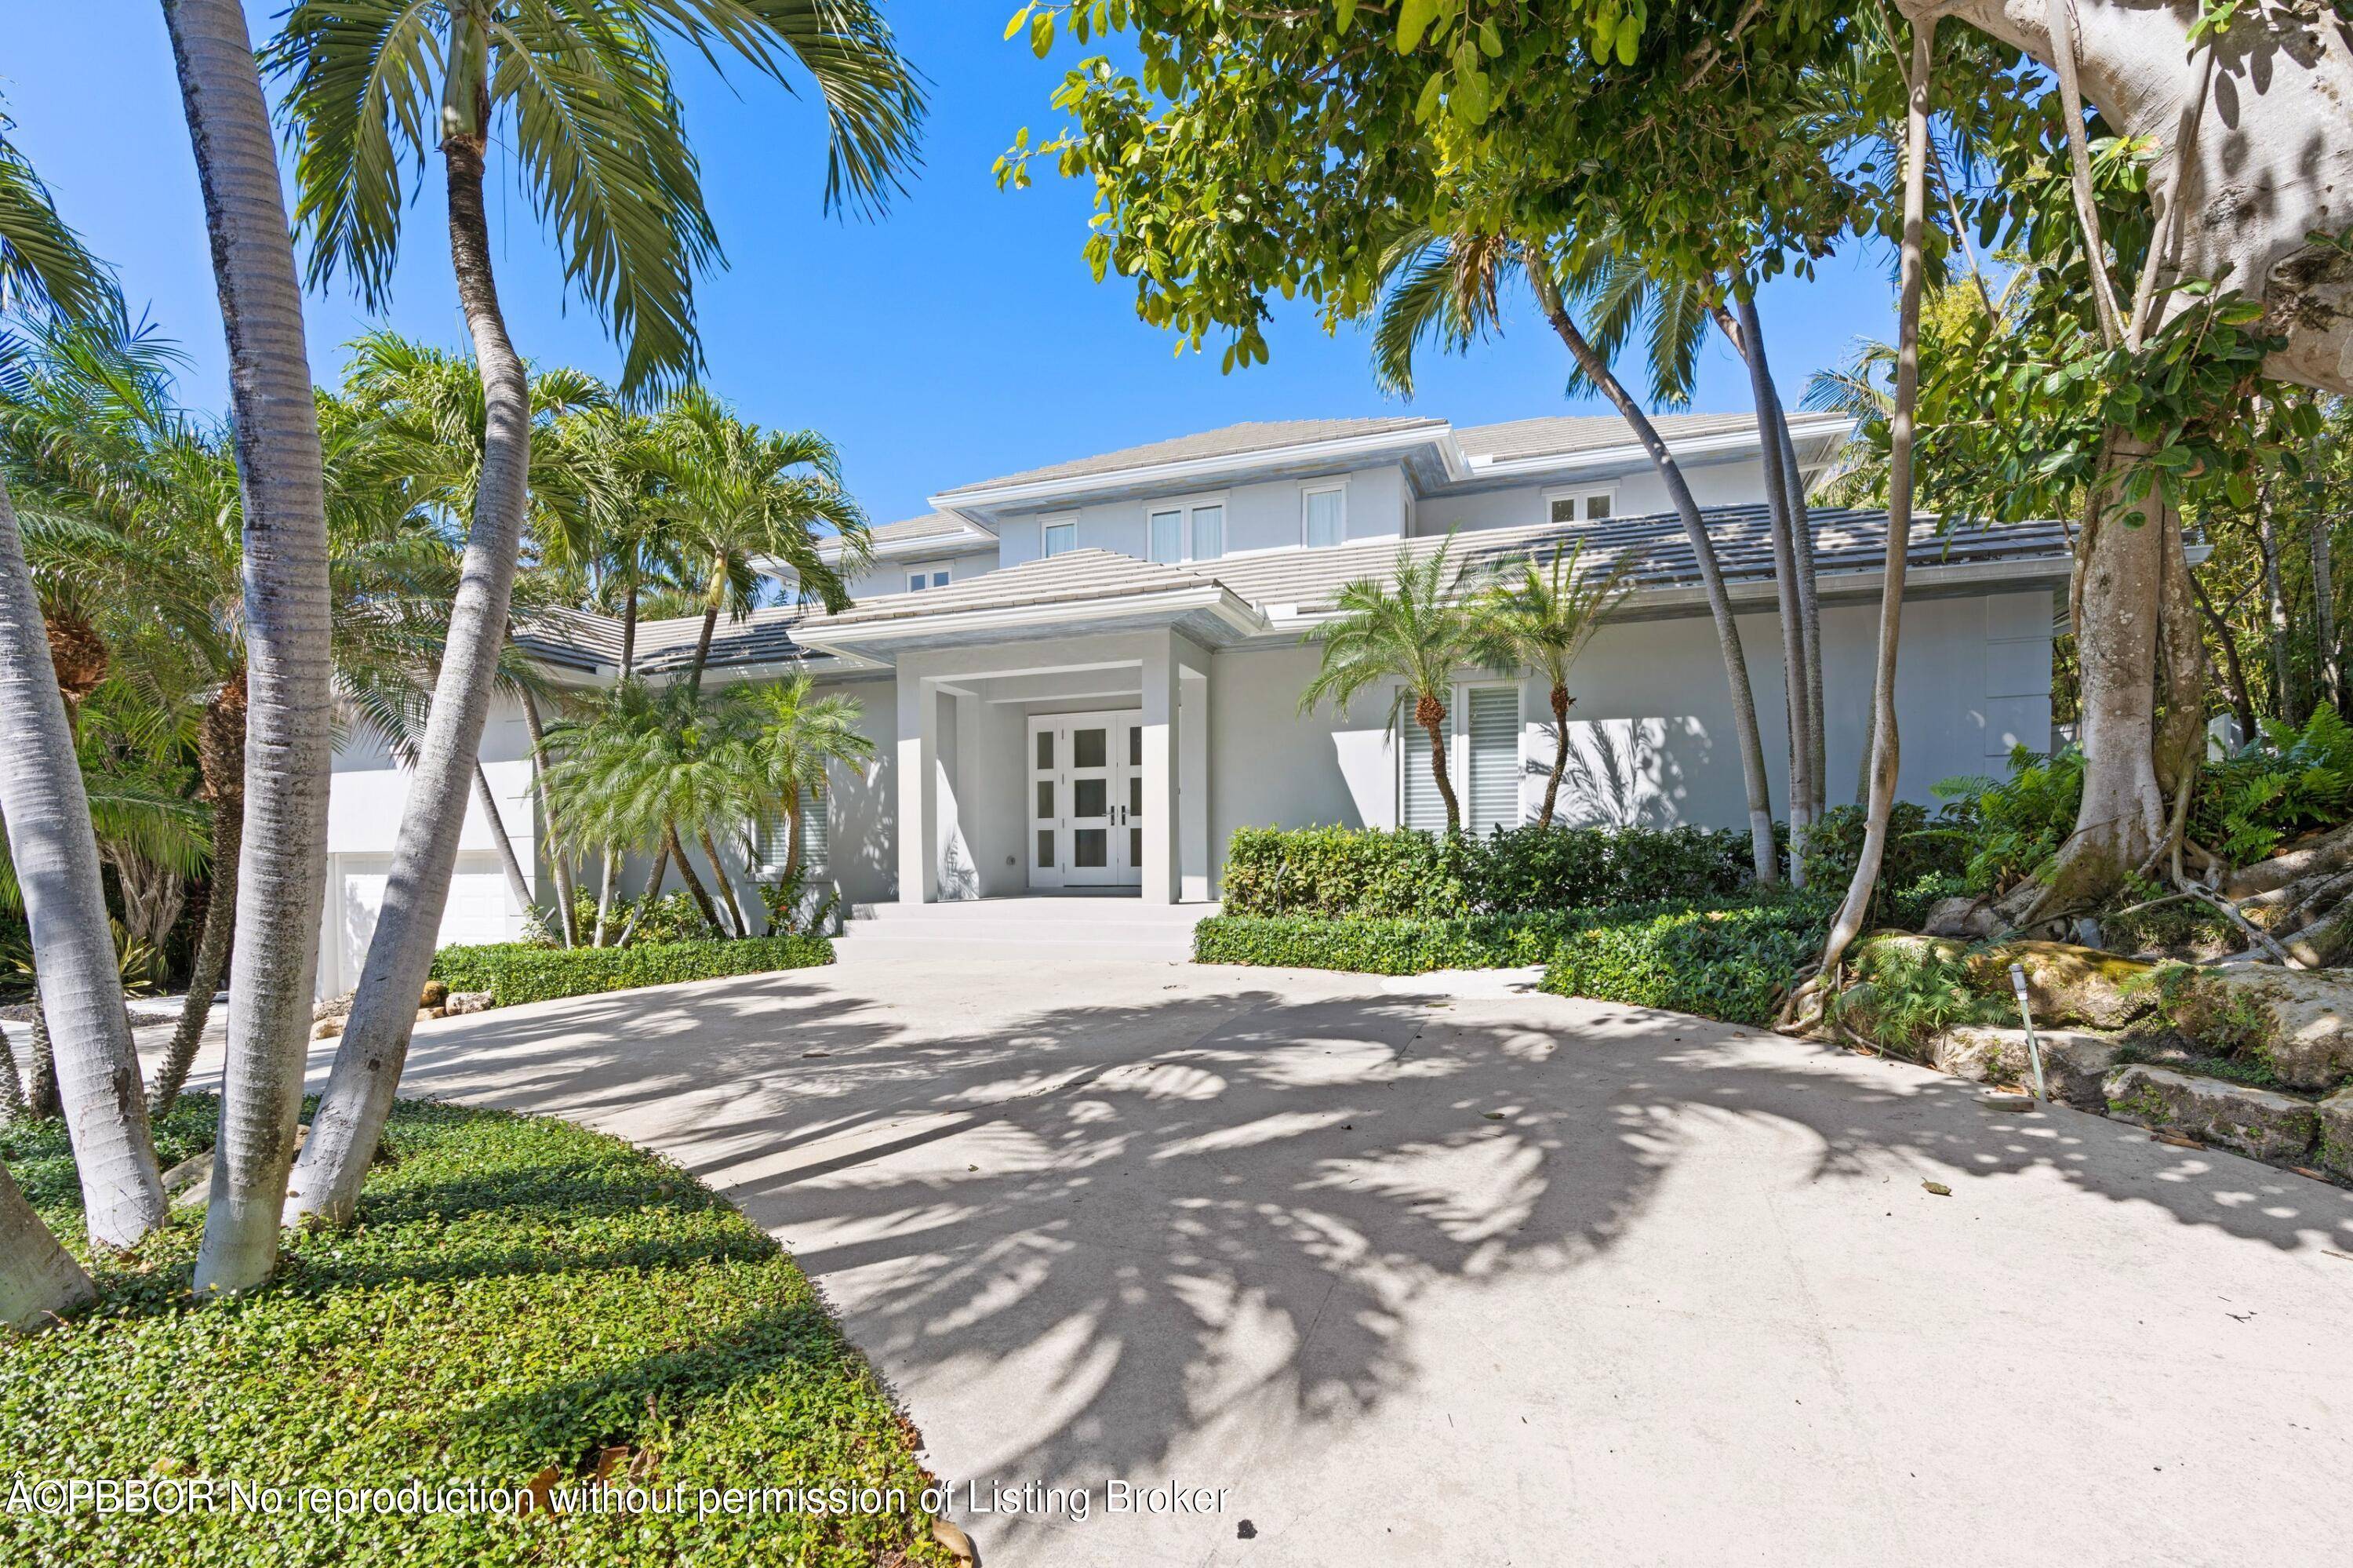 Located just four properties from the ocean, this Mid Century Modern home comprises a 5 bedroom main house and a two story guest house on a generous 14, 810 SF ...